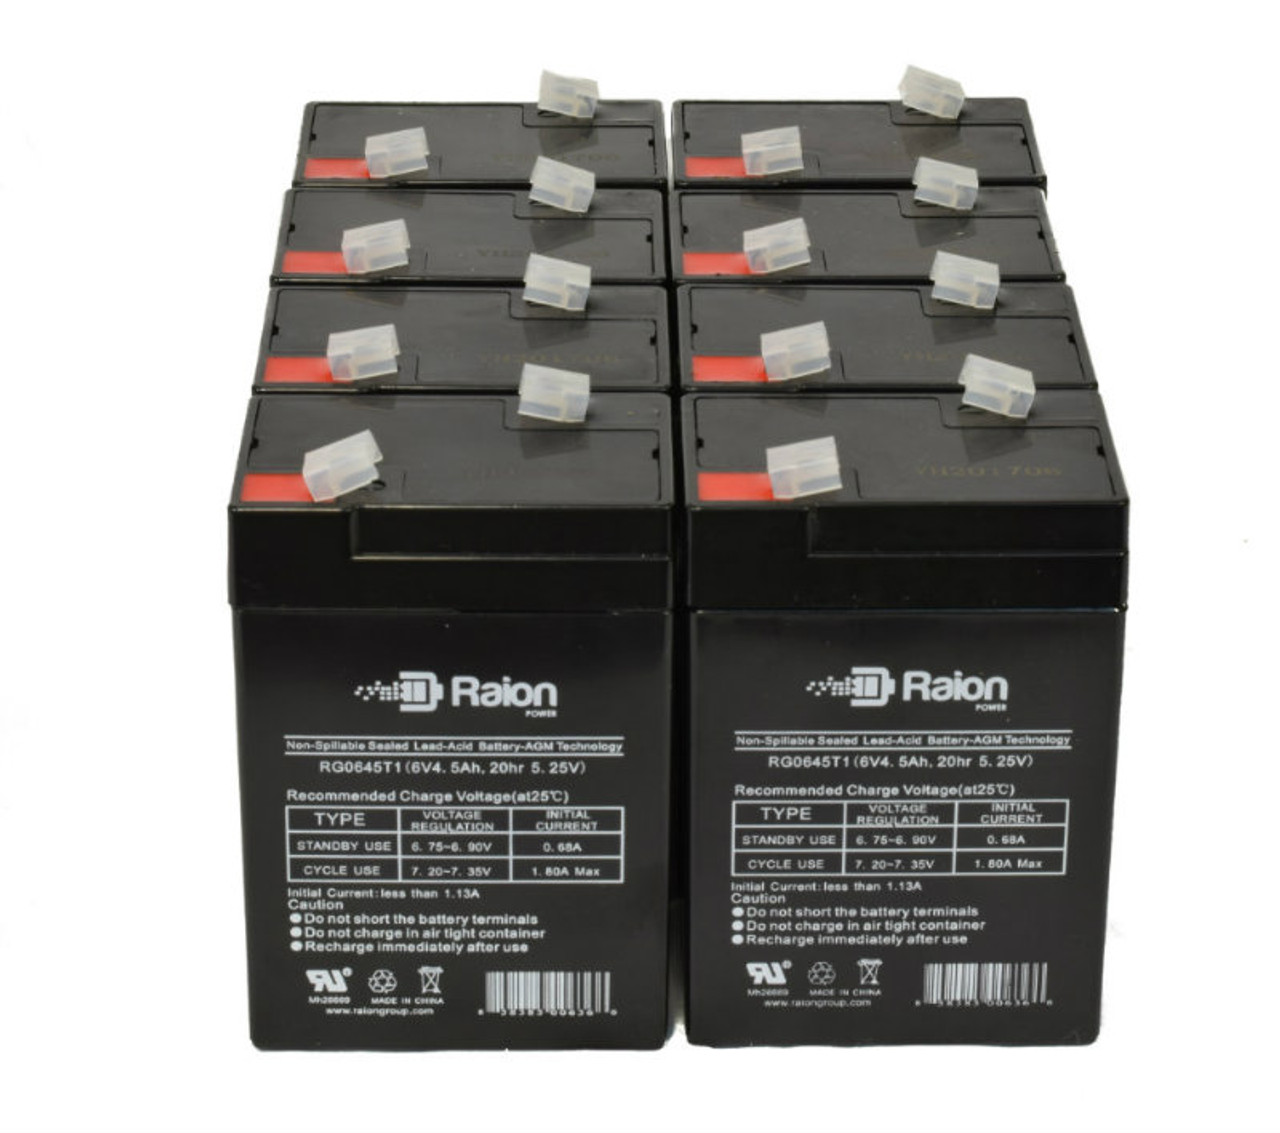 Raion Power 6V 4.5Ah Replacement Emergency Light Battery for Sure-Lites SL2602 - 8 Pack